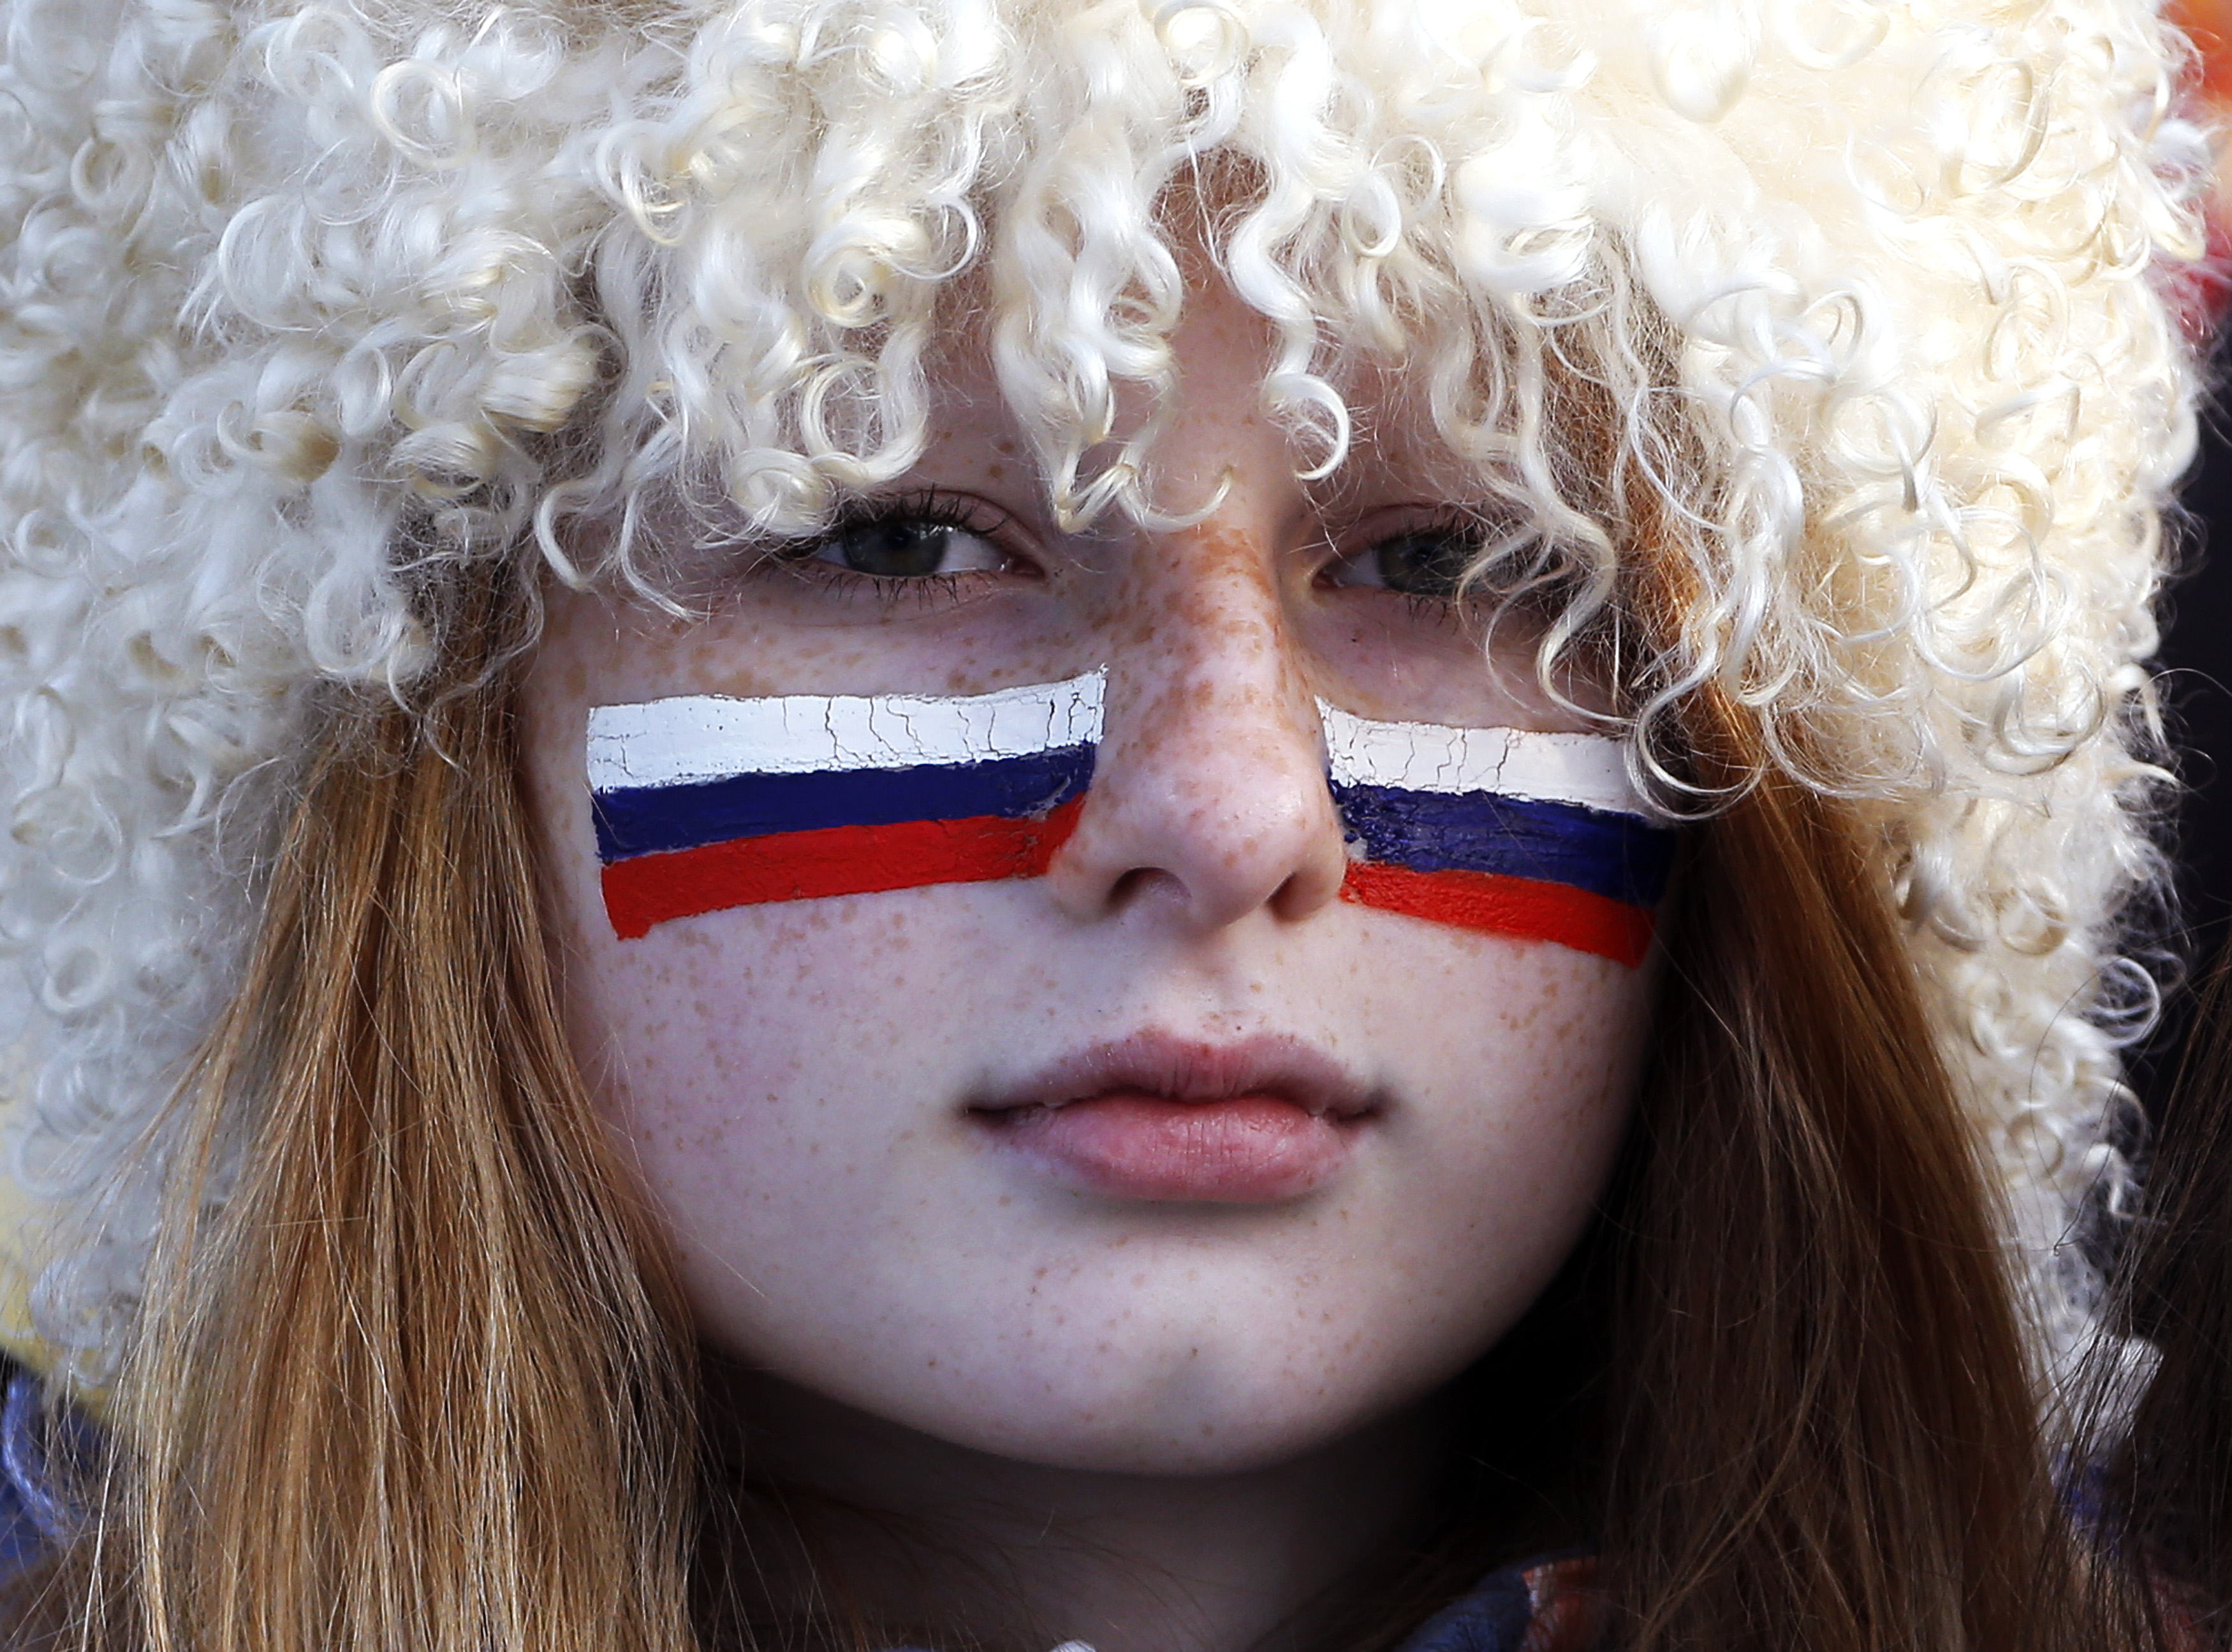 A Russian fan with her face painted with the Russian flag watches the men's quarter-finals ice hockey game between Russia and Finland. Russia was eliminated from the men's ice hockey competition at the Sochi Games on Wednesday following a 3-1 quarter-final loss to Finland. (Eric Gaillard—Reuters)